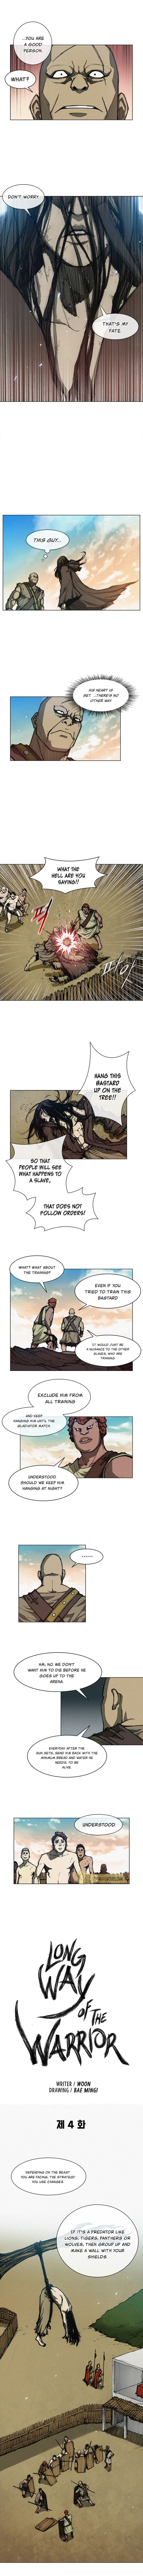 long-way-of-the-warrior-chap-4-2